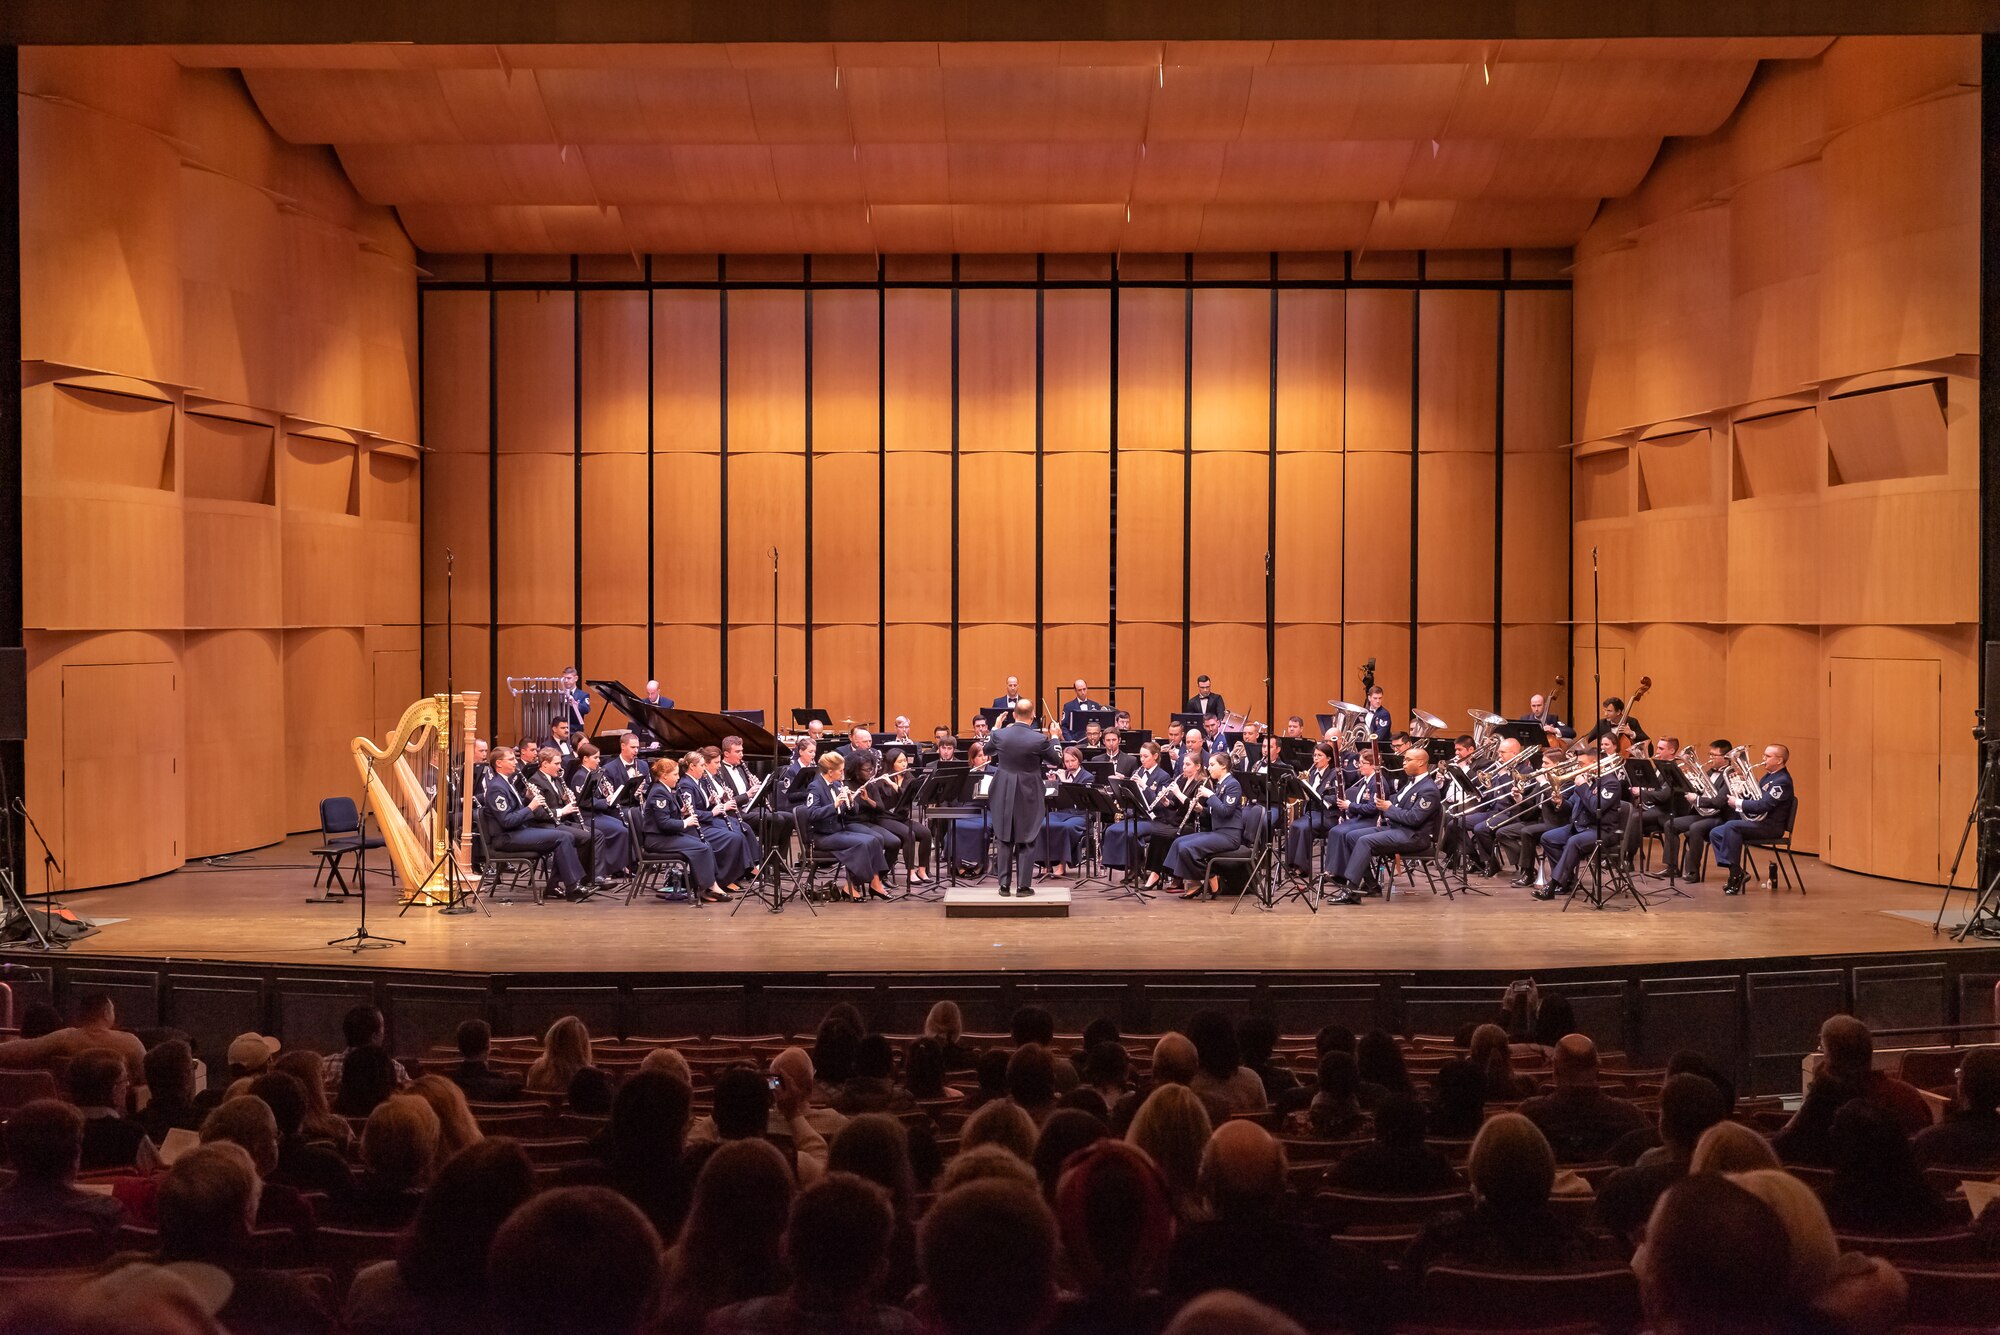 Col. Don Schofield conducts an ensemble consisting of The U.S. Air Force Concert Band and college students who were selected to perform for the 2019 Collegiate Symposium. The concert took place at the Rachel M. Schlesinger Concert Hall and Arts Center in Alexandria, Virginia, on Saturday, Feb. 2, 2019. (U.S. Air Force Photo by Master Sgt. Brandon Chaney)